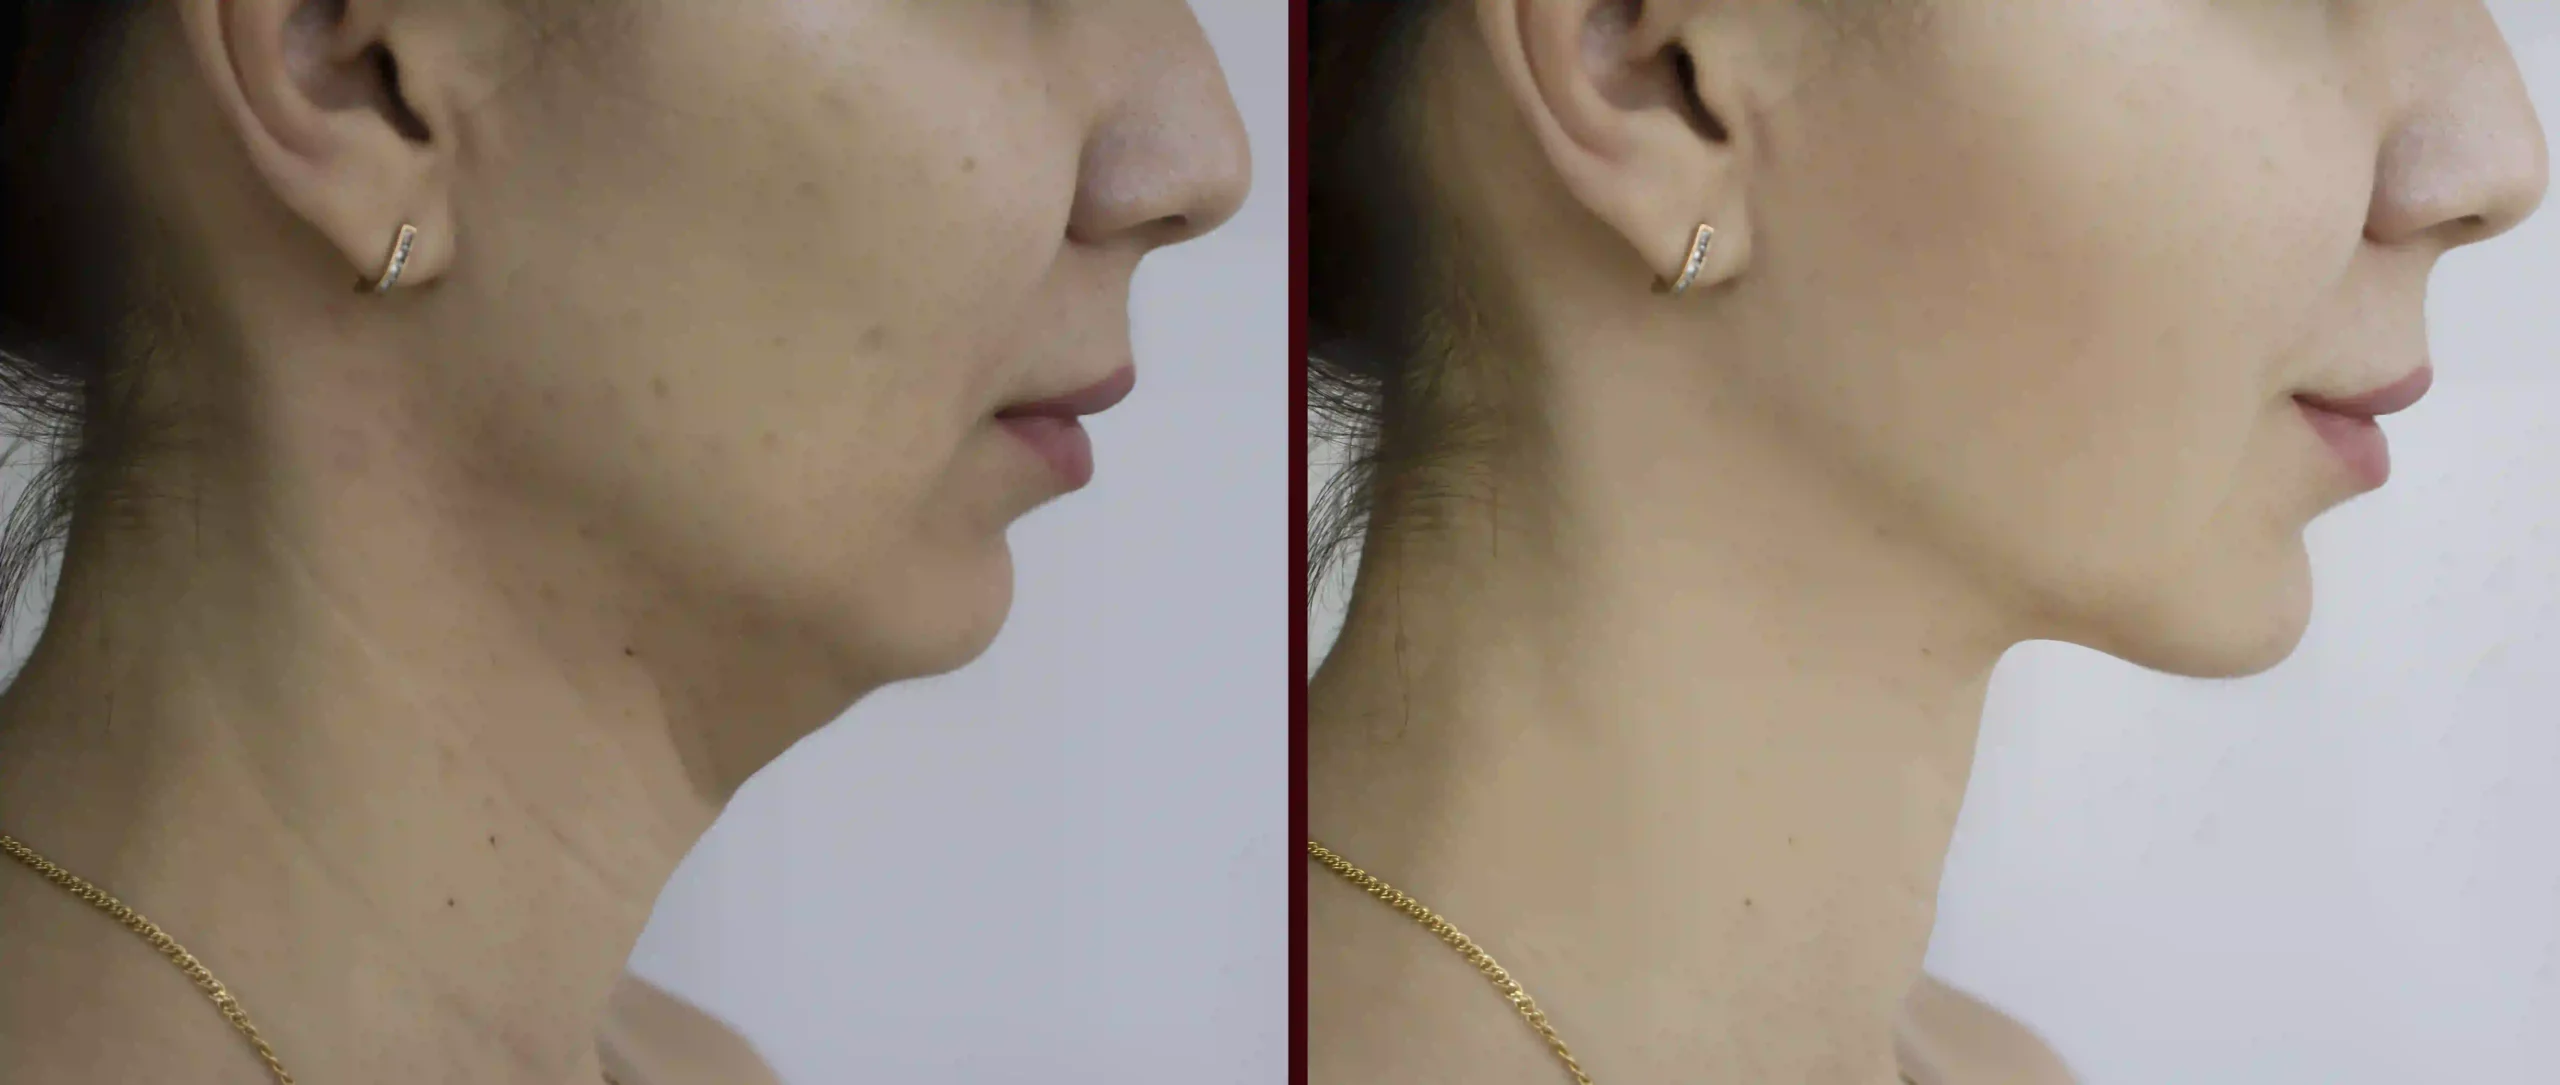 Non-Surgical Jawline and Chin Contouring at DermaVue